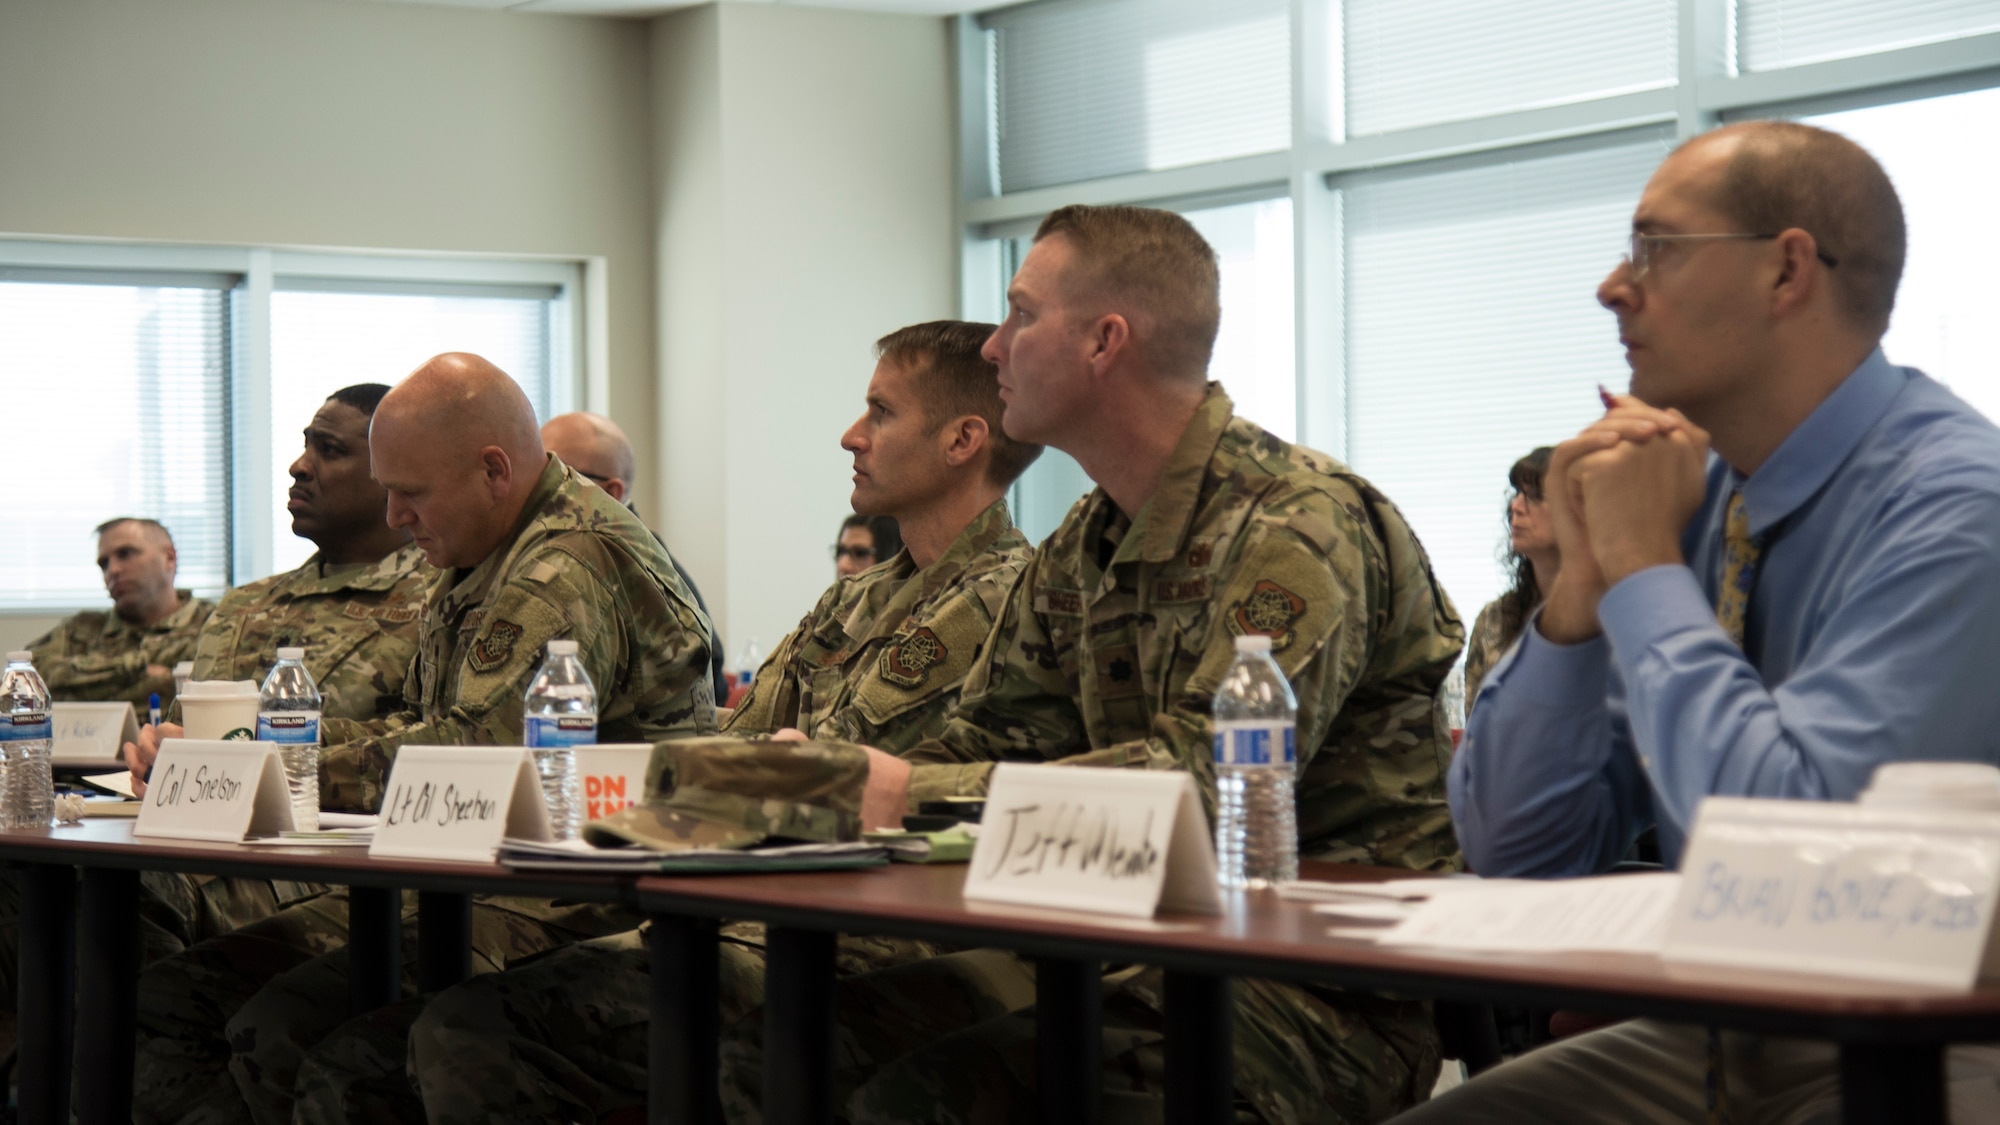 6th Air Refueling Wing leaders listen to a proposal during MacDill Pitch Day Jan. 22, 2020, in, Tampa, Fla.  The event resulted in three contracts being awarded to small businesses for a combined $325,000 in less than 24 hours.